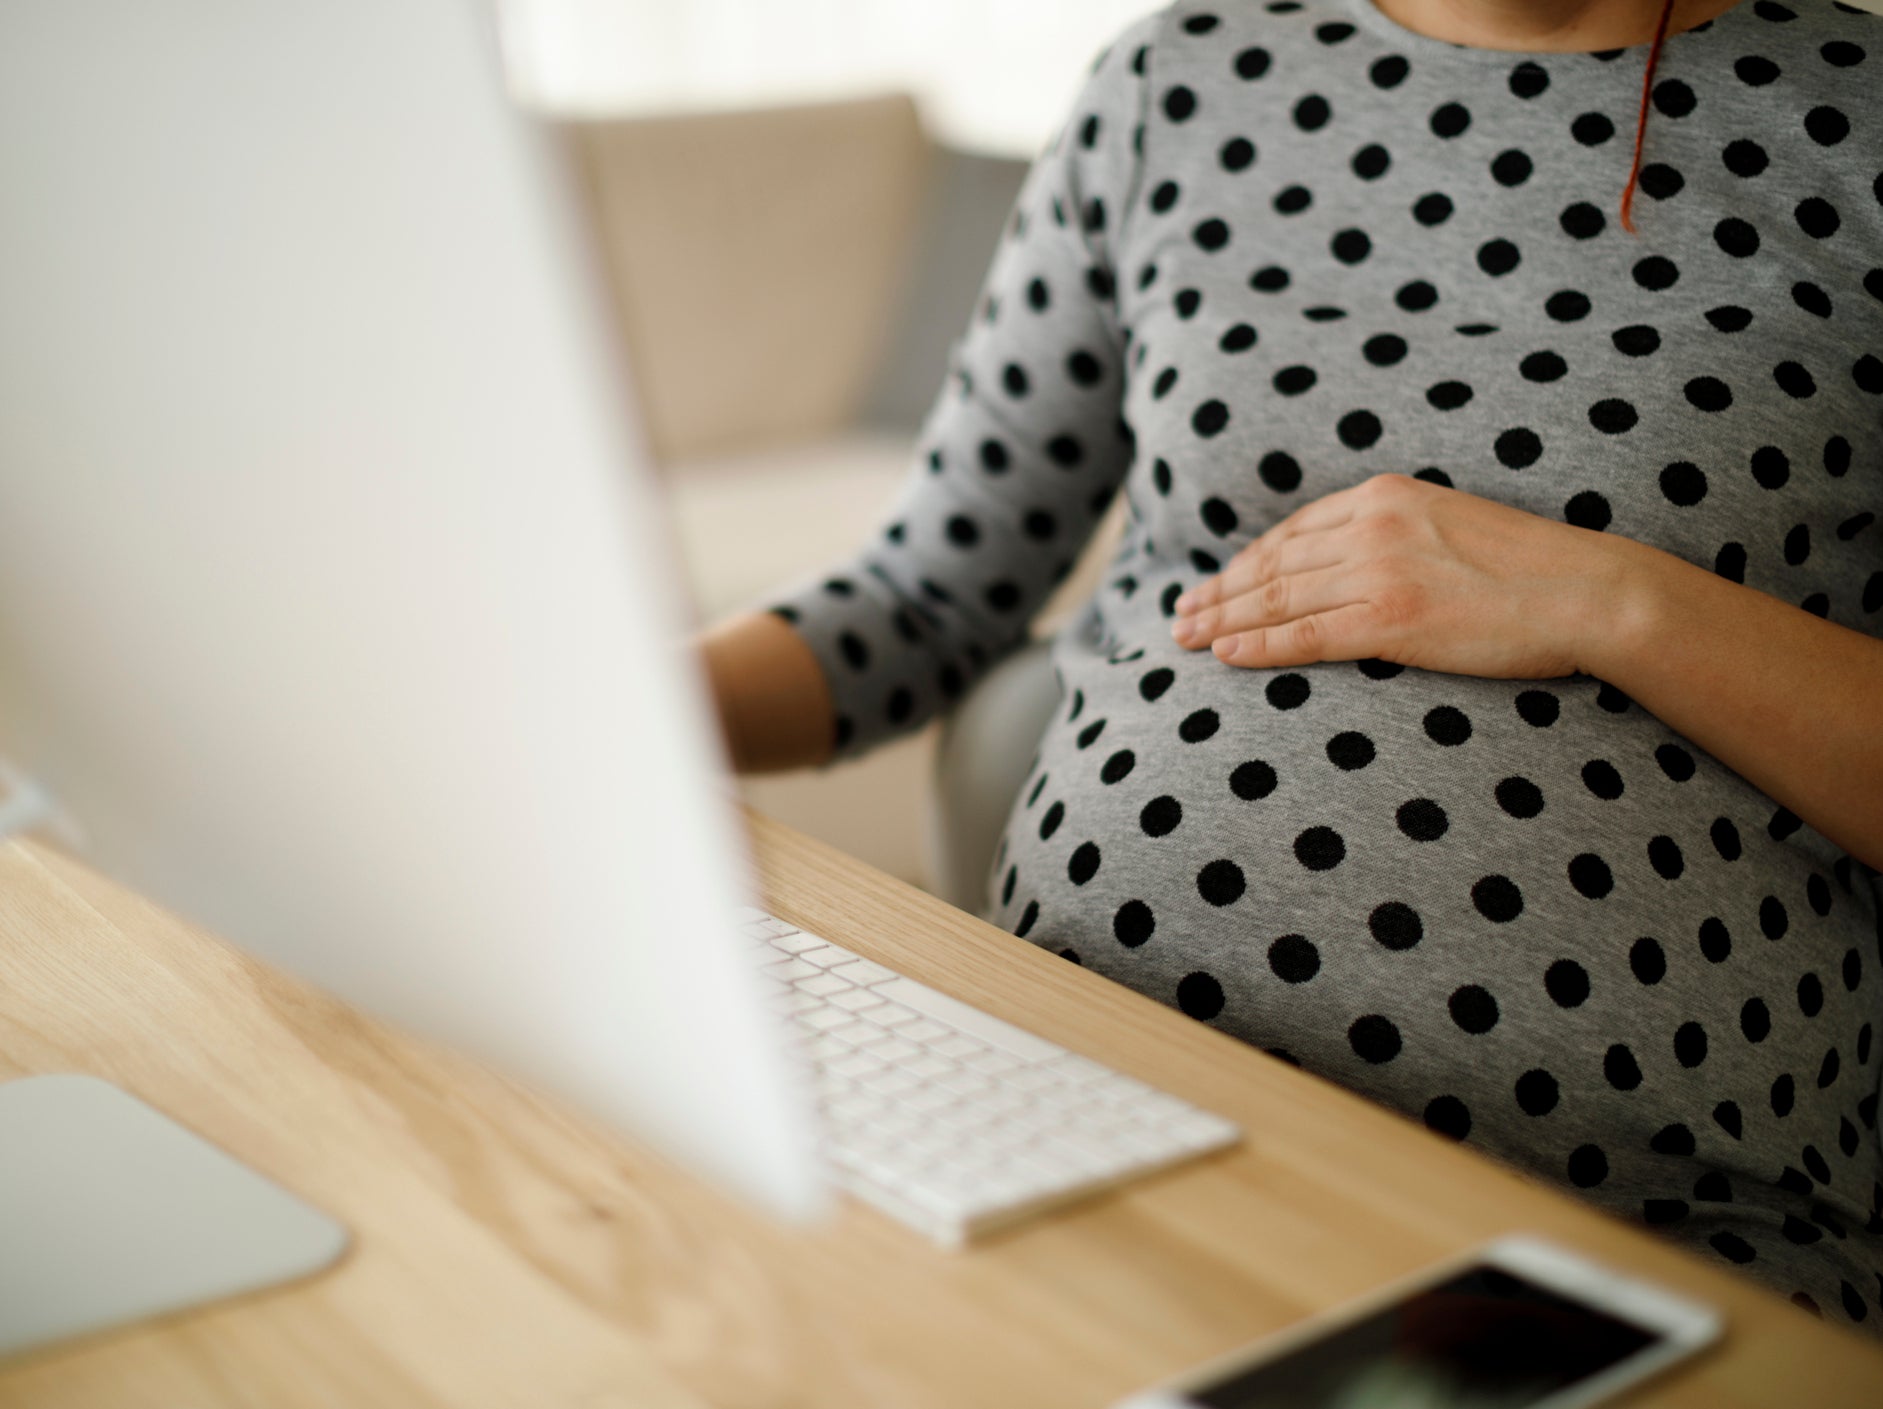 Recent studies have found that pregnant women have faced discrimination at work during the Covid-19 pandemic